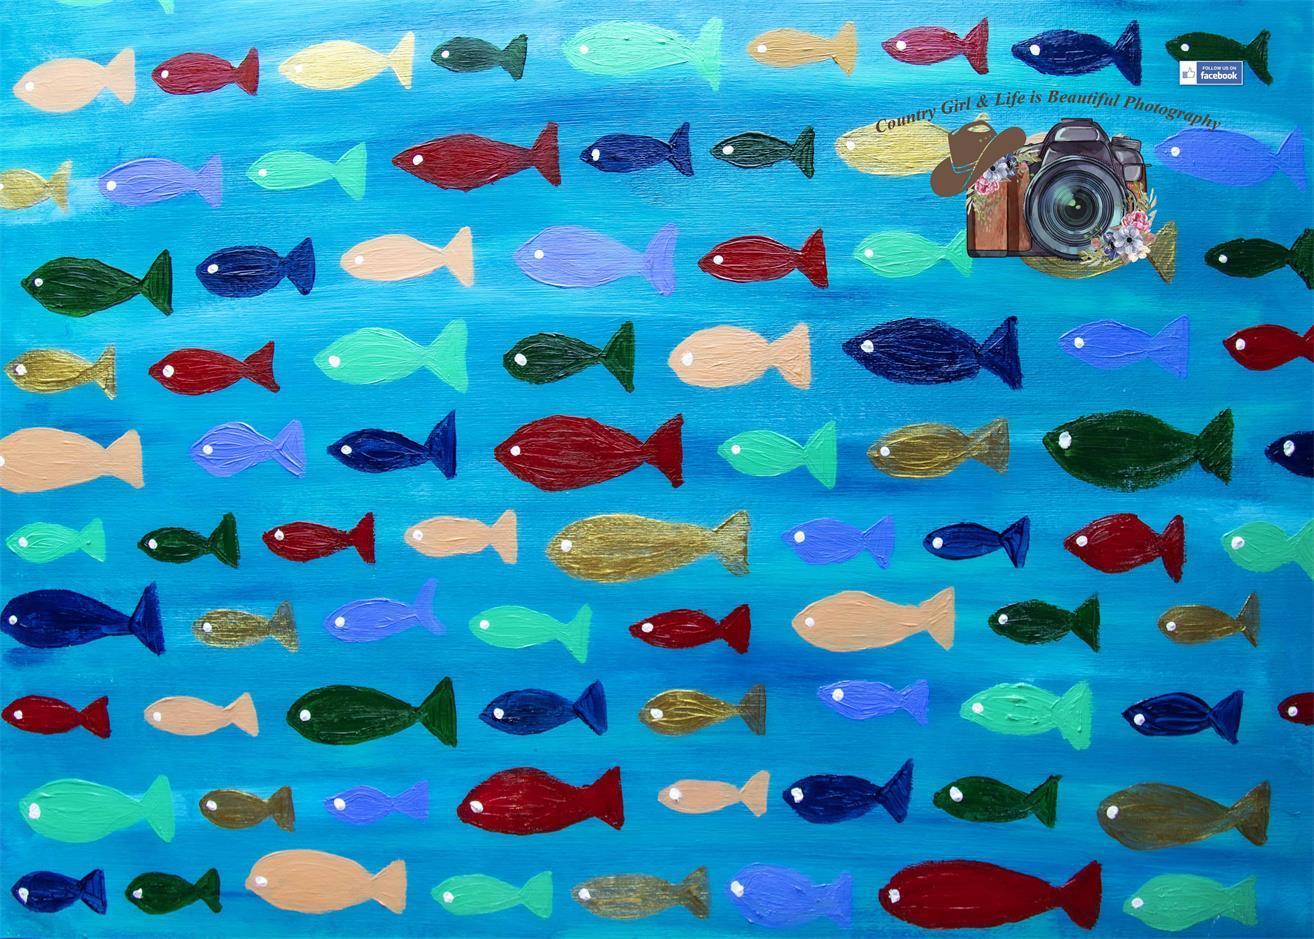 Kate Sea of fish Backdrop for Photography Designed By Leann West